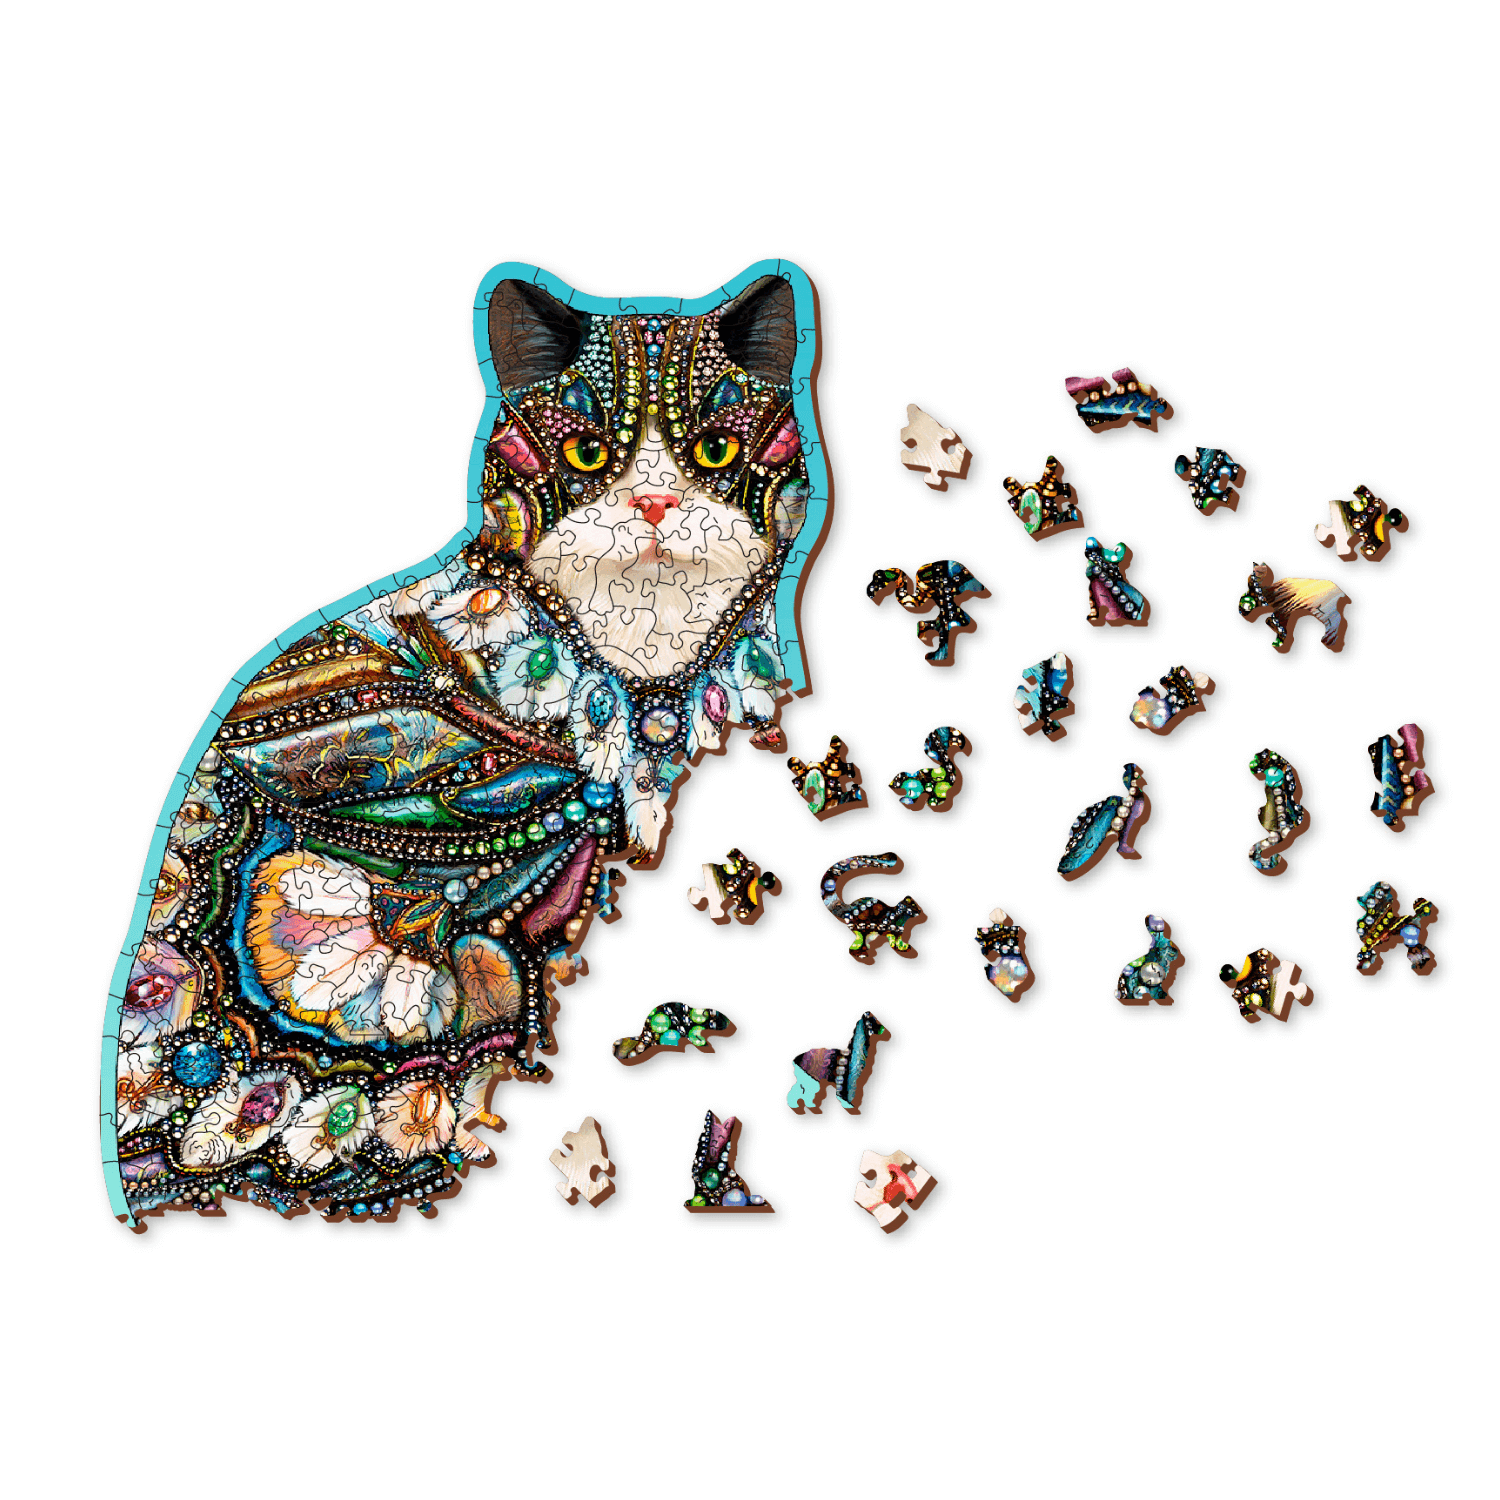 The Jewel Cat Puzzle | Wooden Puzzle 250-wood puzzle-WoodenCity--